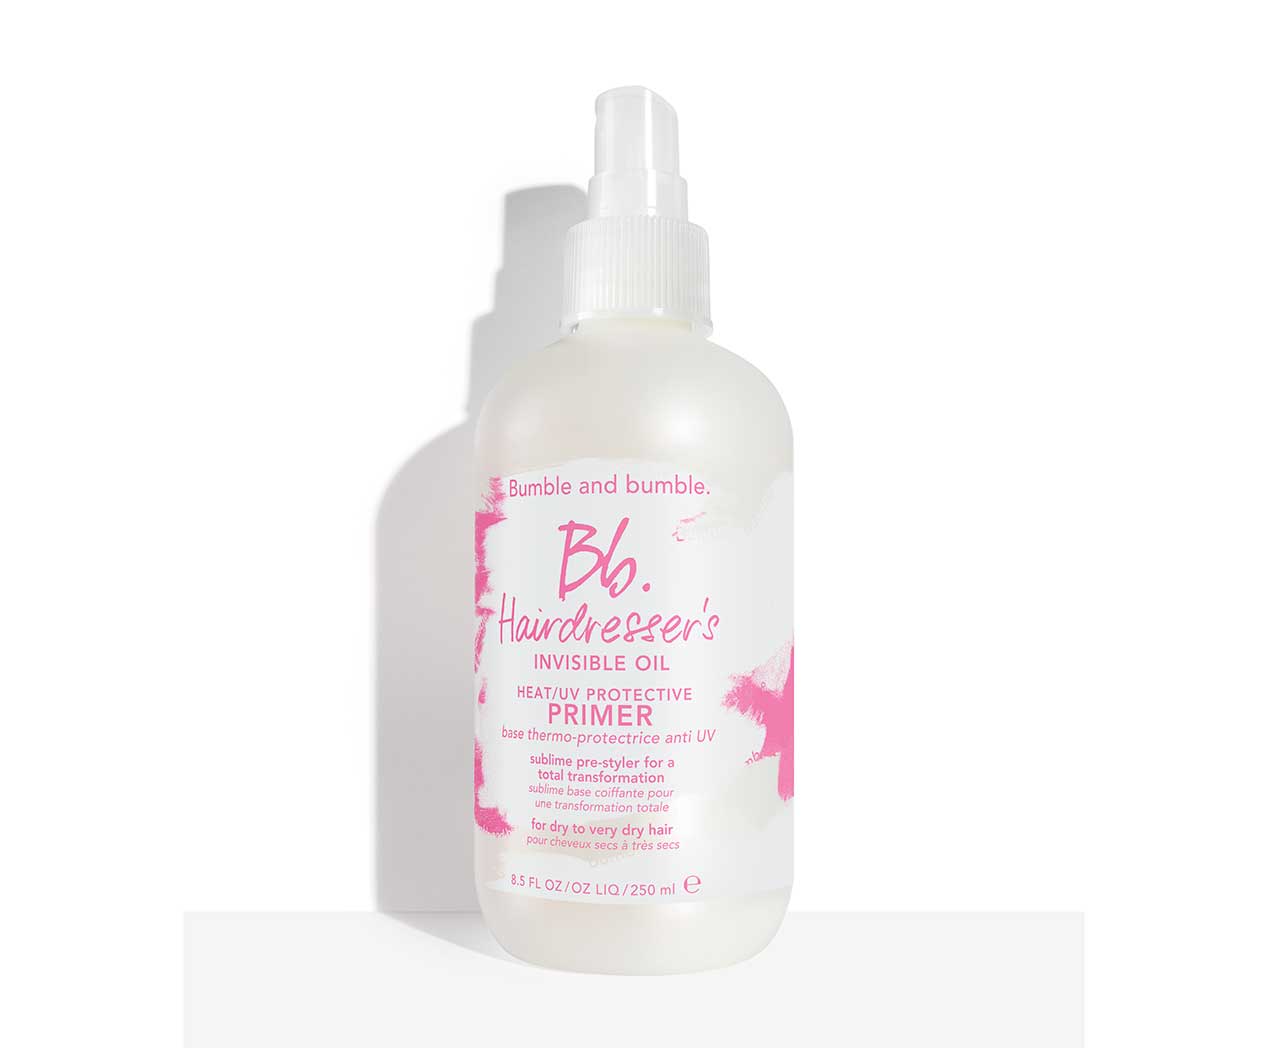 BUMBLE-AND-BUMBLE-Bb.-Hairdresser’s-Invisible-Oil-Heat_UV-Protector-Primer.jpg